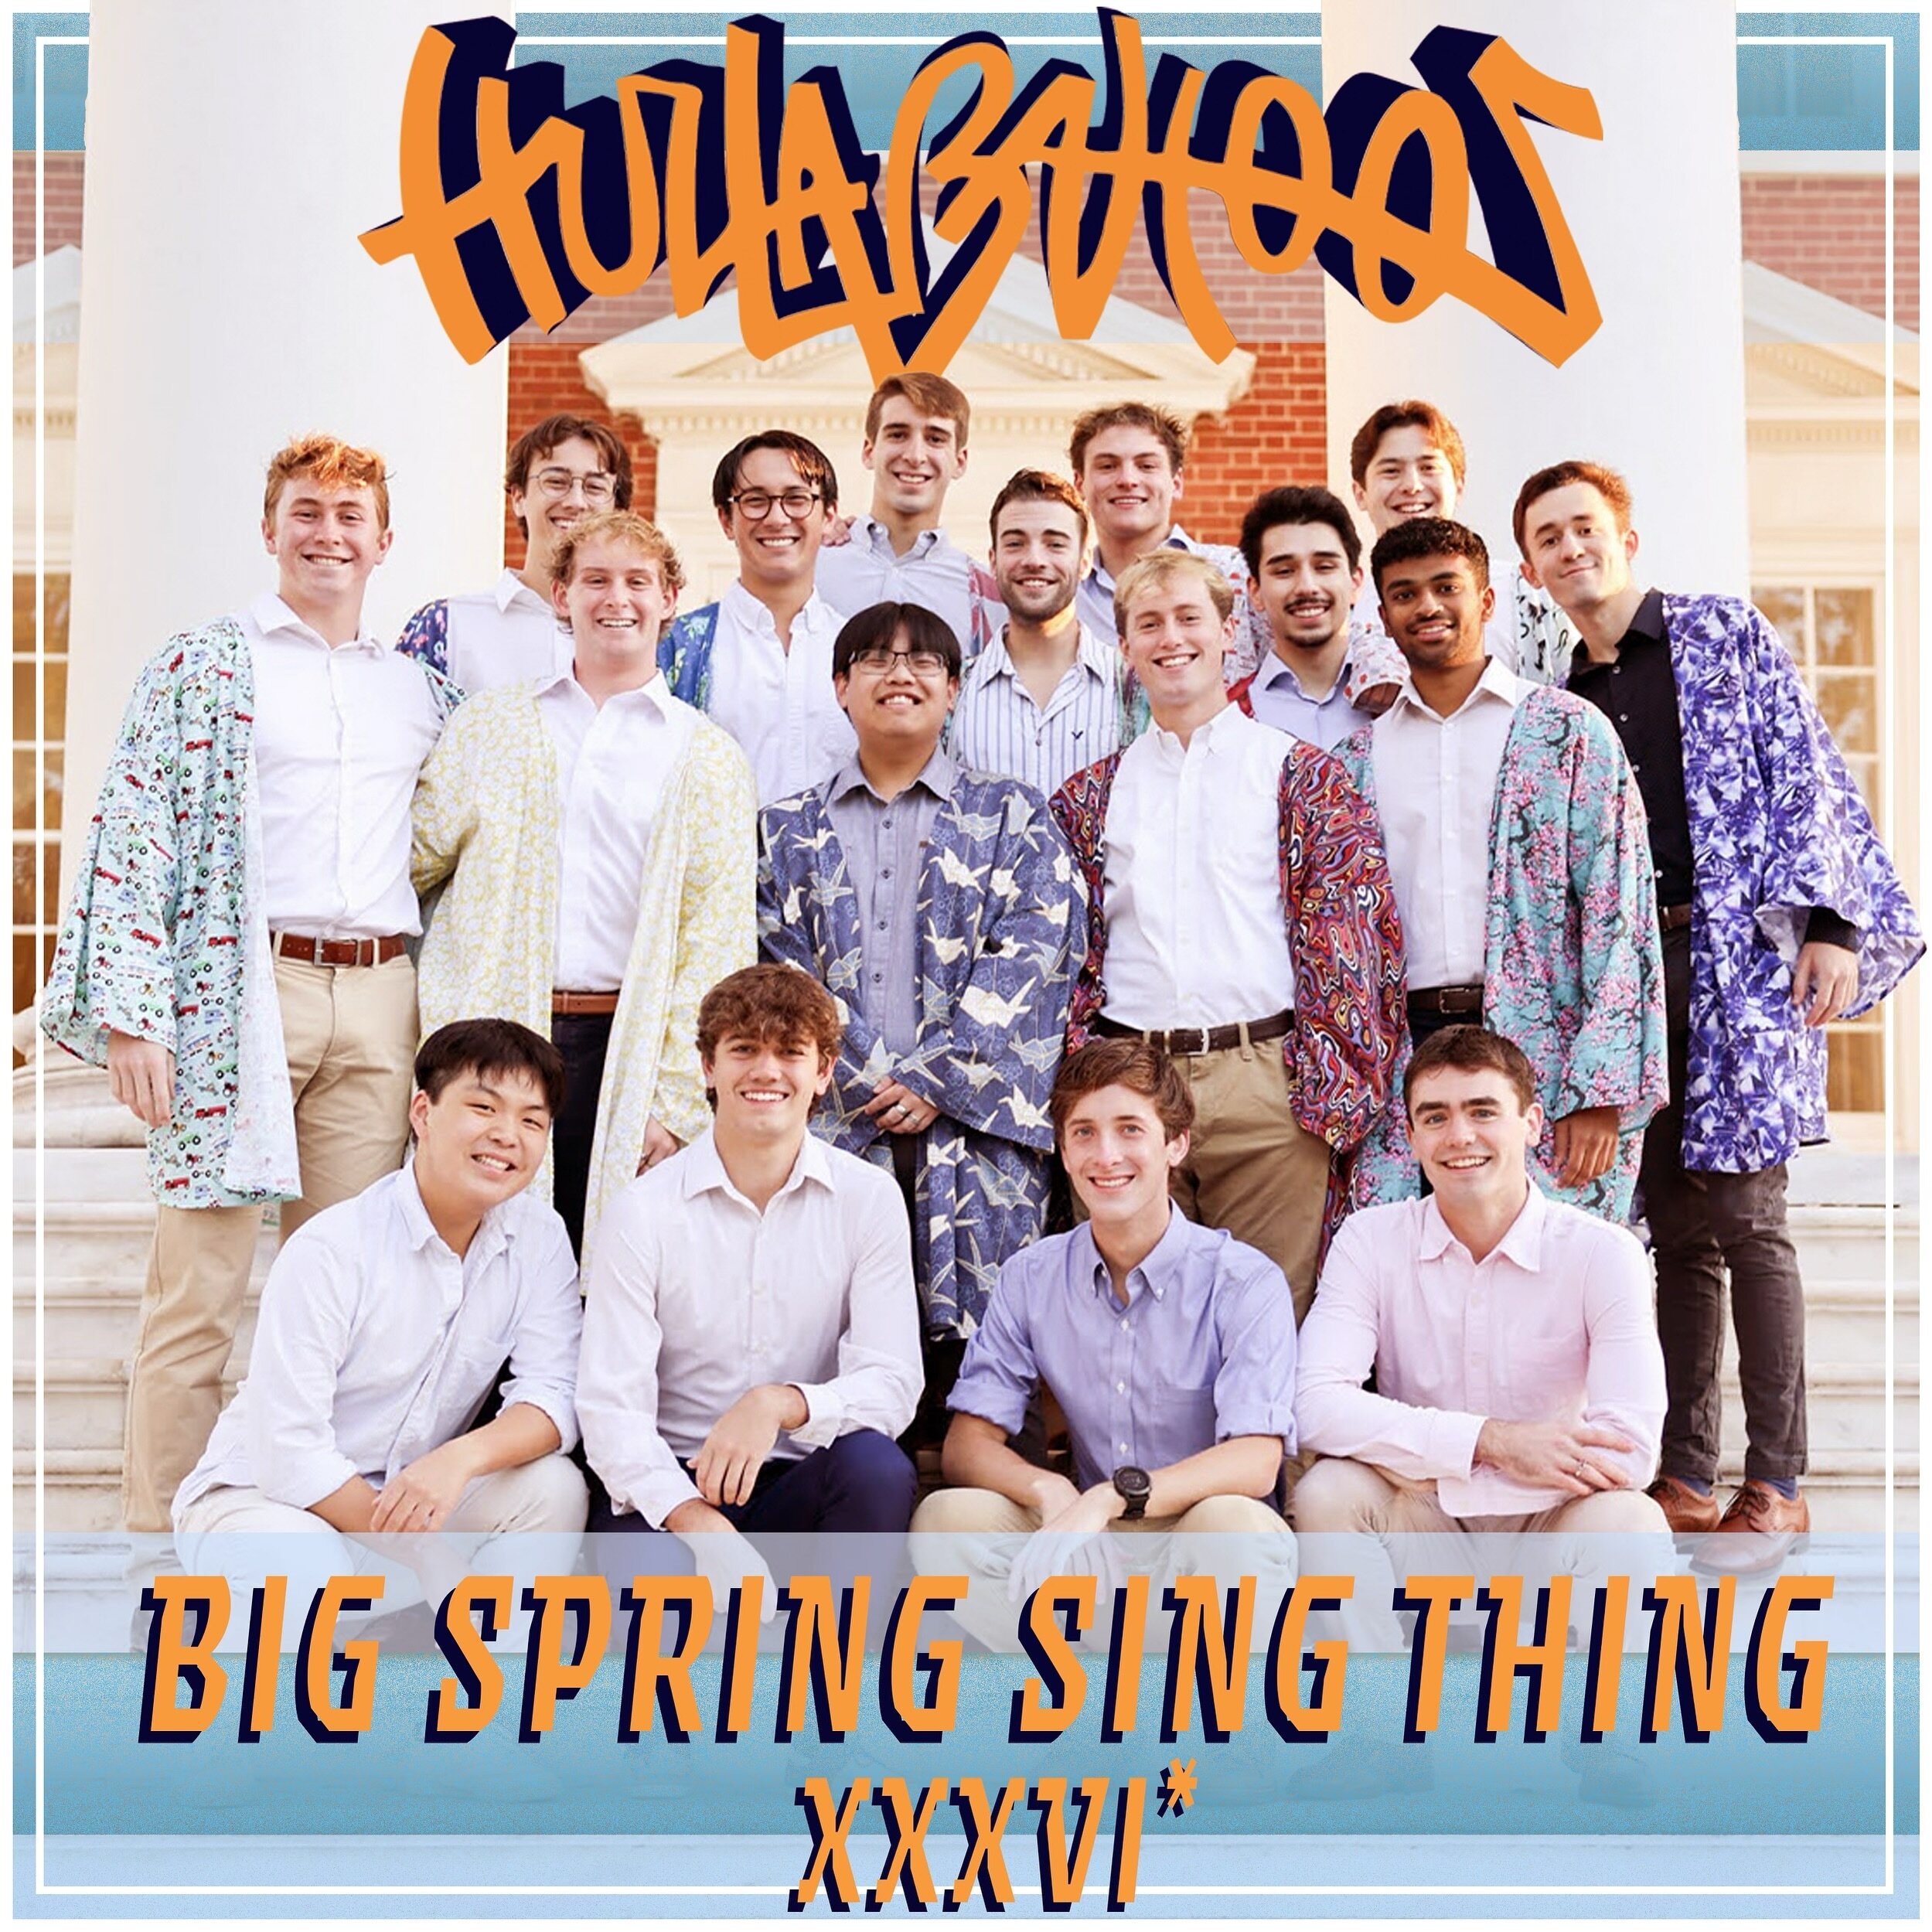 could it be&hellip; THE HULLABAHOOS BIG SPRING SING THING IS BACK&hellip; AND IT&rsquo;S TWO NIGHTS⁉️

Student Concert:
🗓️: thursday, april 11 
🕓: 8pm
📍: mcleod hall
🎟️: venmo &lsquo;virginia-hullabahoos&rsquo; &mdash; $8 for students, $15 for ge